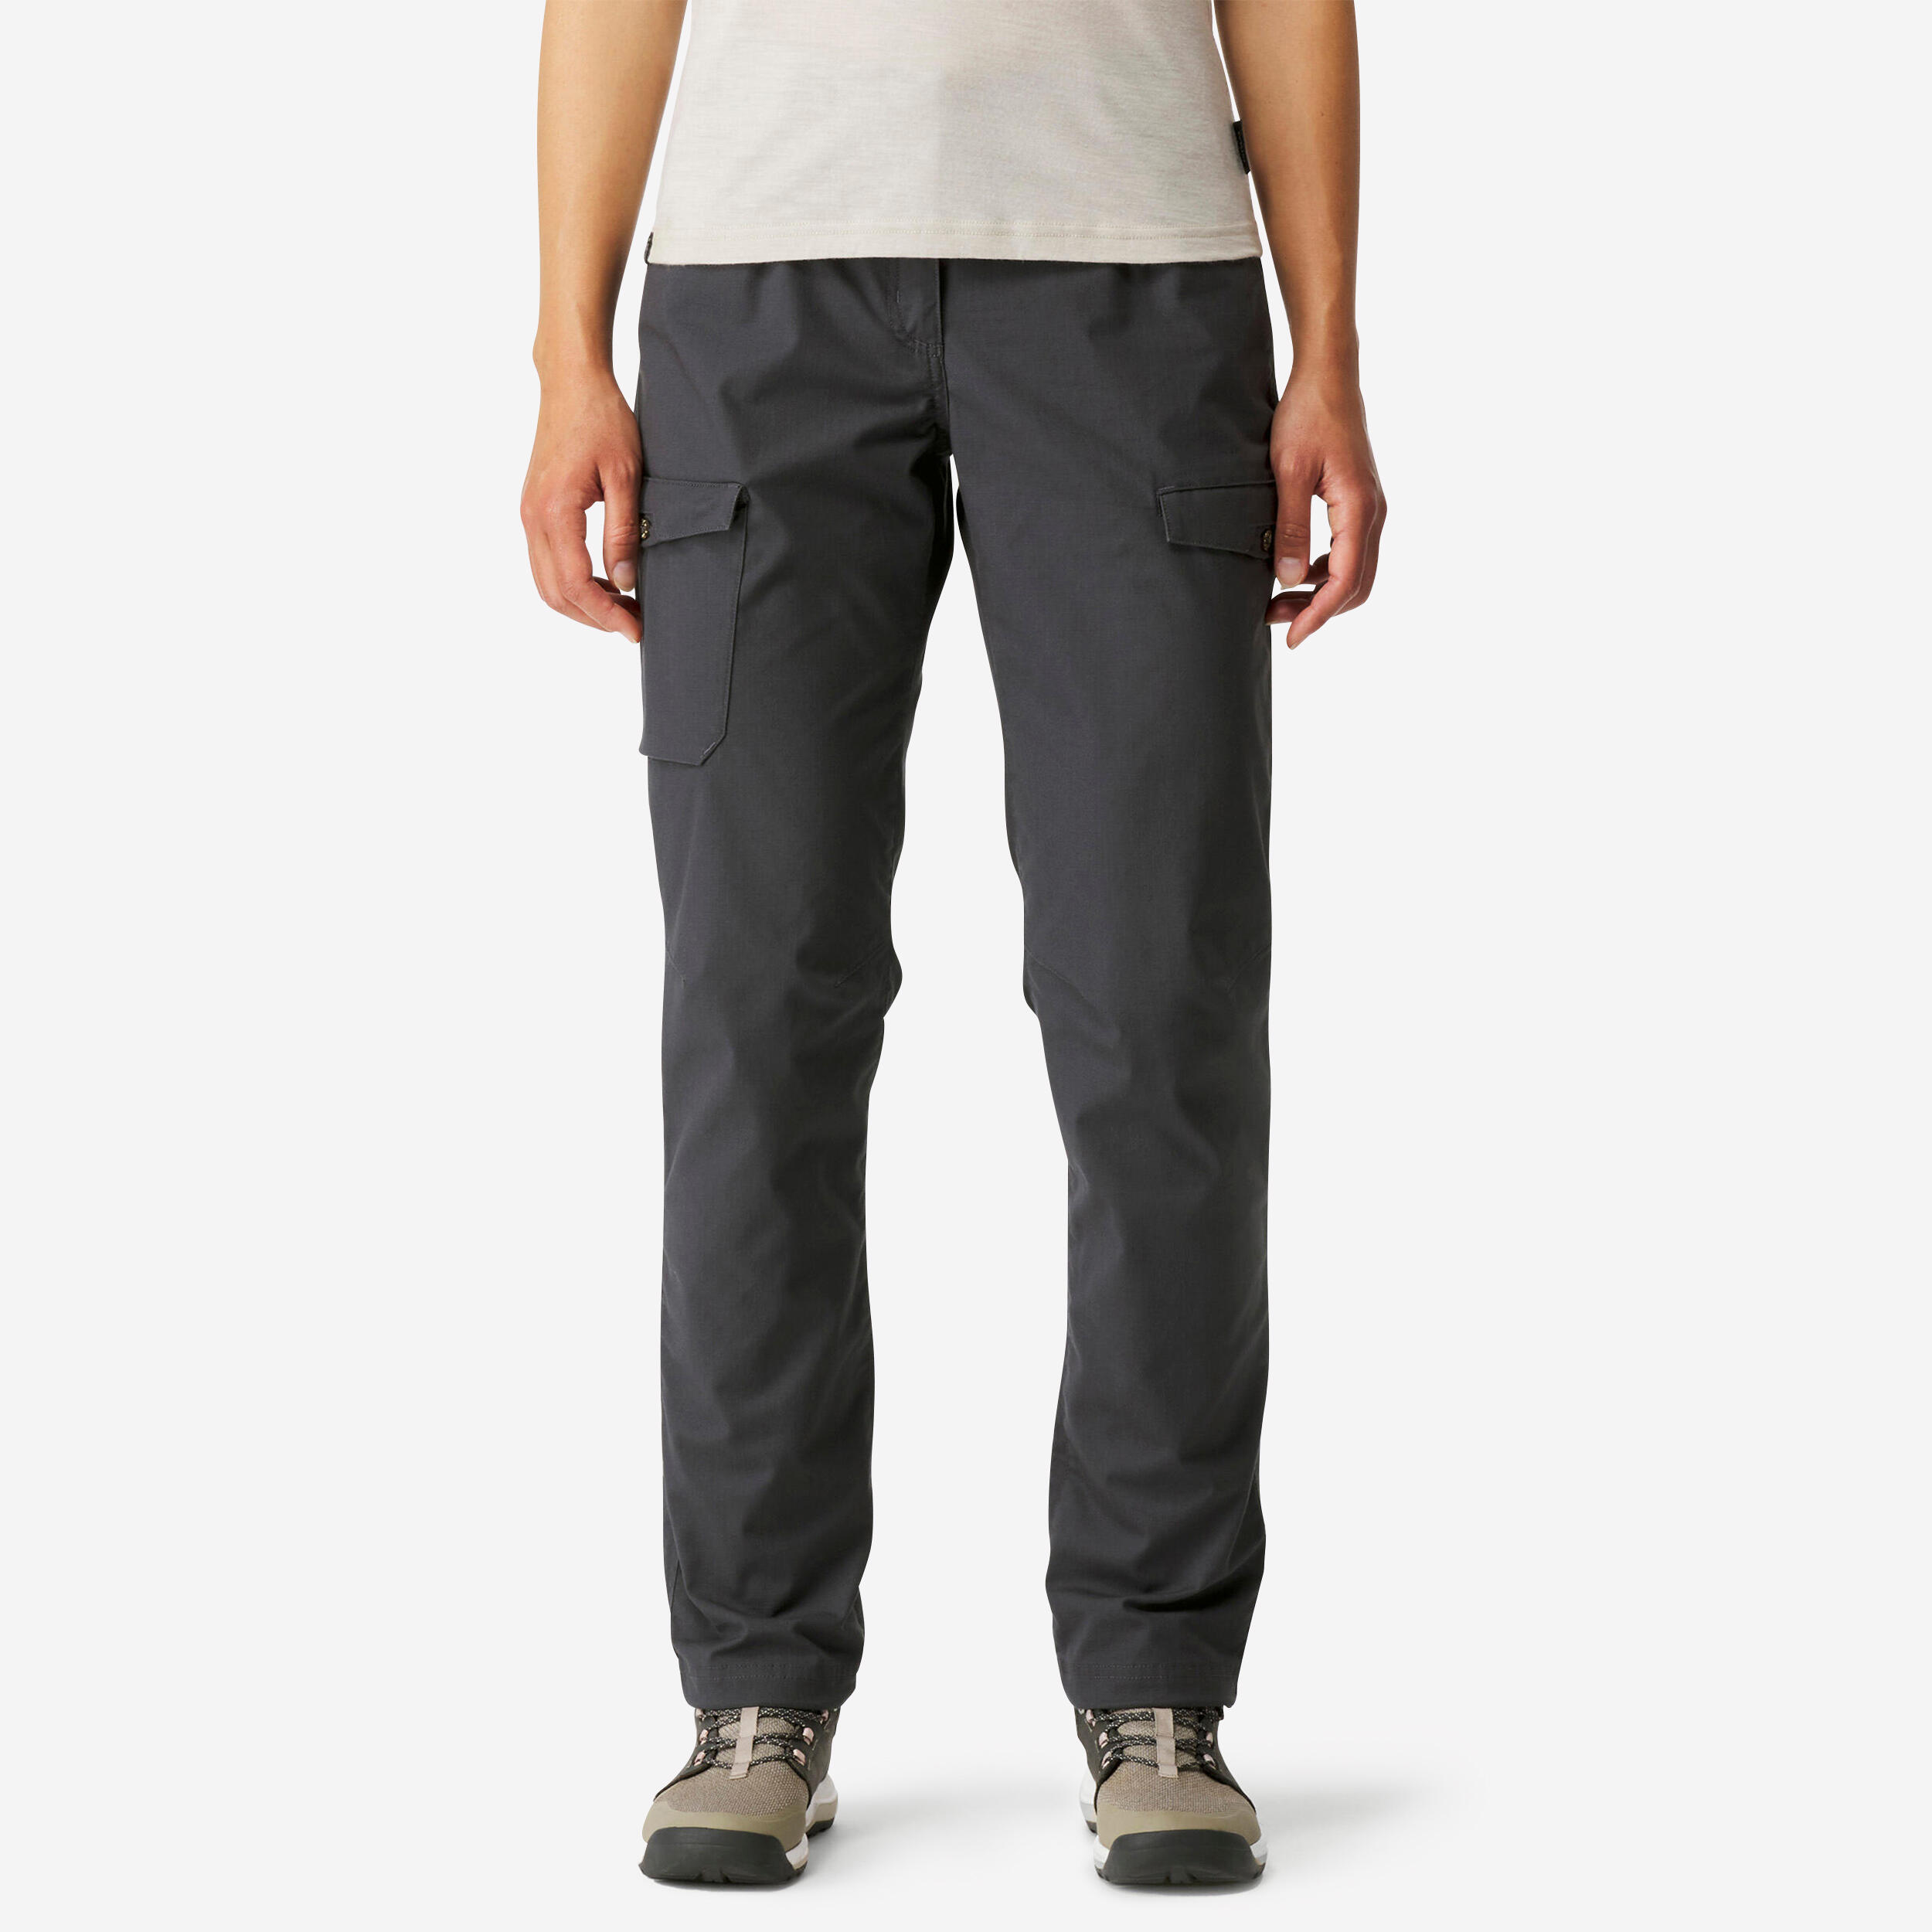 Unbranded Men's Straight-fit Cargo Pants Work Trousers India | Ubuy